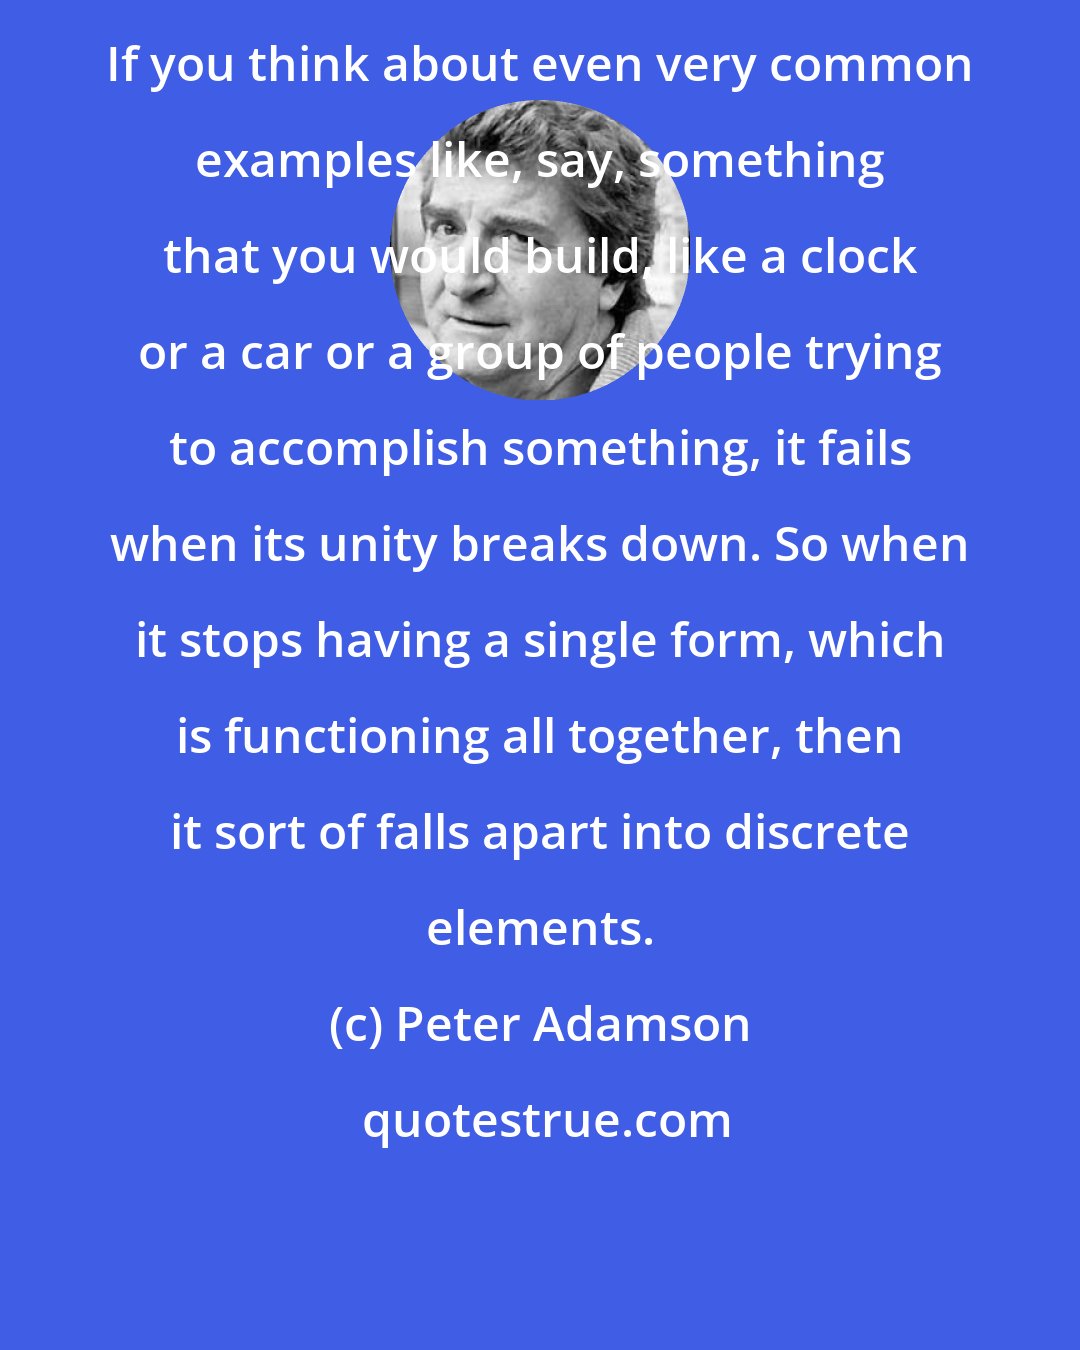 Peter Adamson: If you think about even very common examples like, say, something that you would build, like a clock or a car or a group of people trying to accomplish something, it fails when its unity breaks down. So when it stops having a single form, which is functioning all together, then it sort of falls apart into discrete elements.